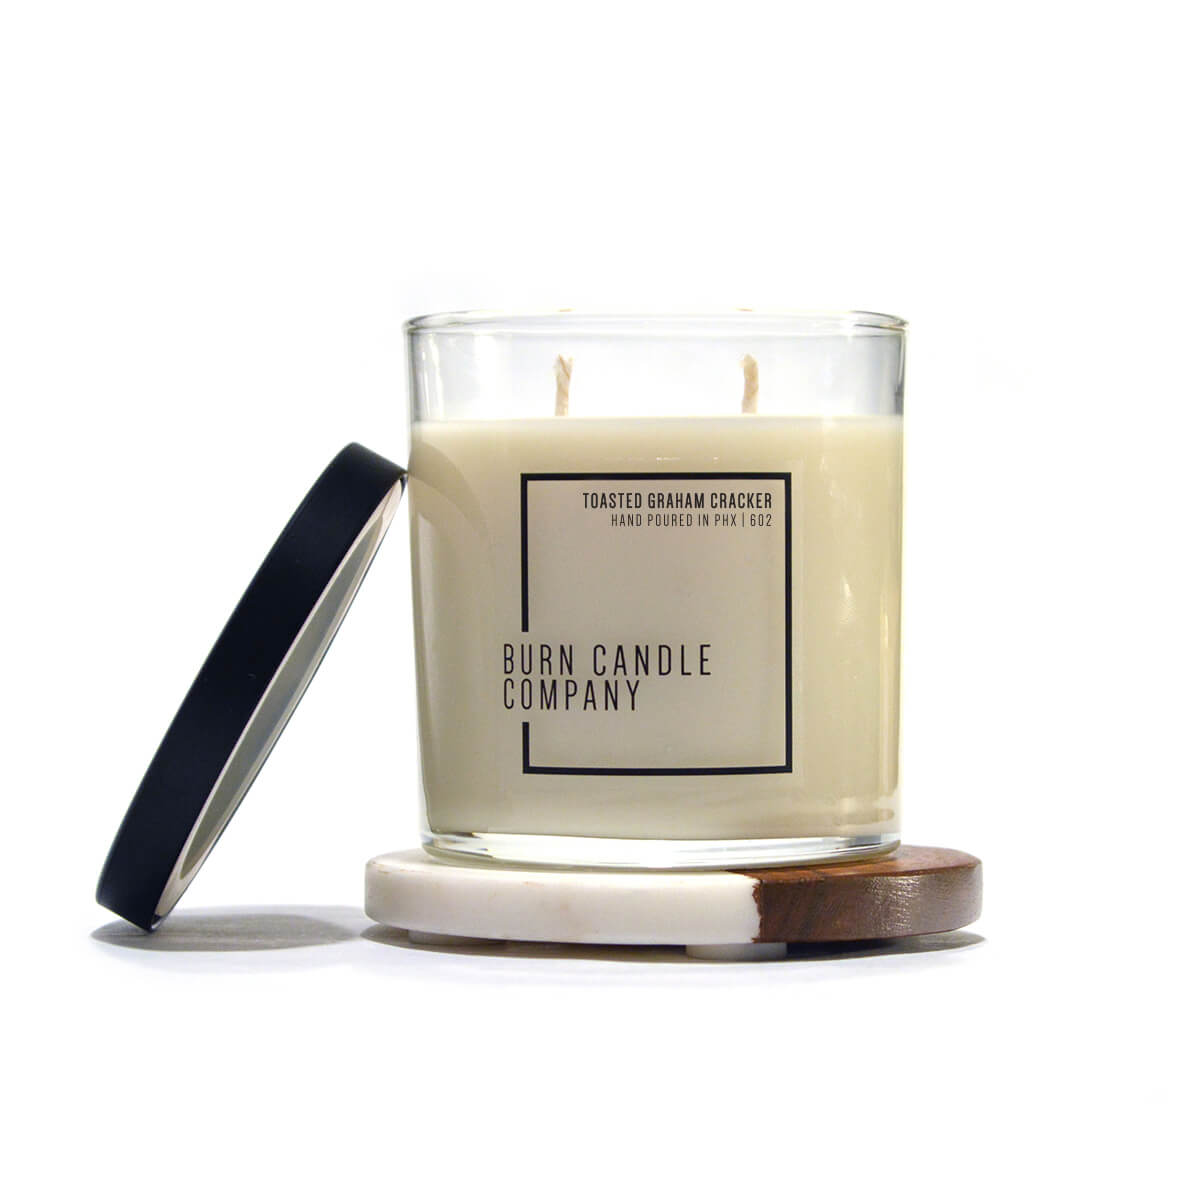 Green Gift Guide - Burn Candle